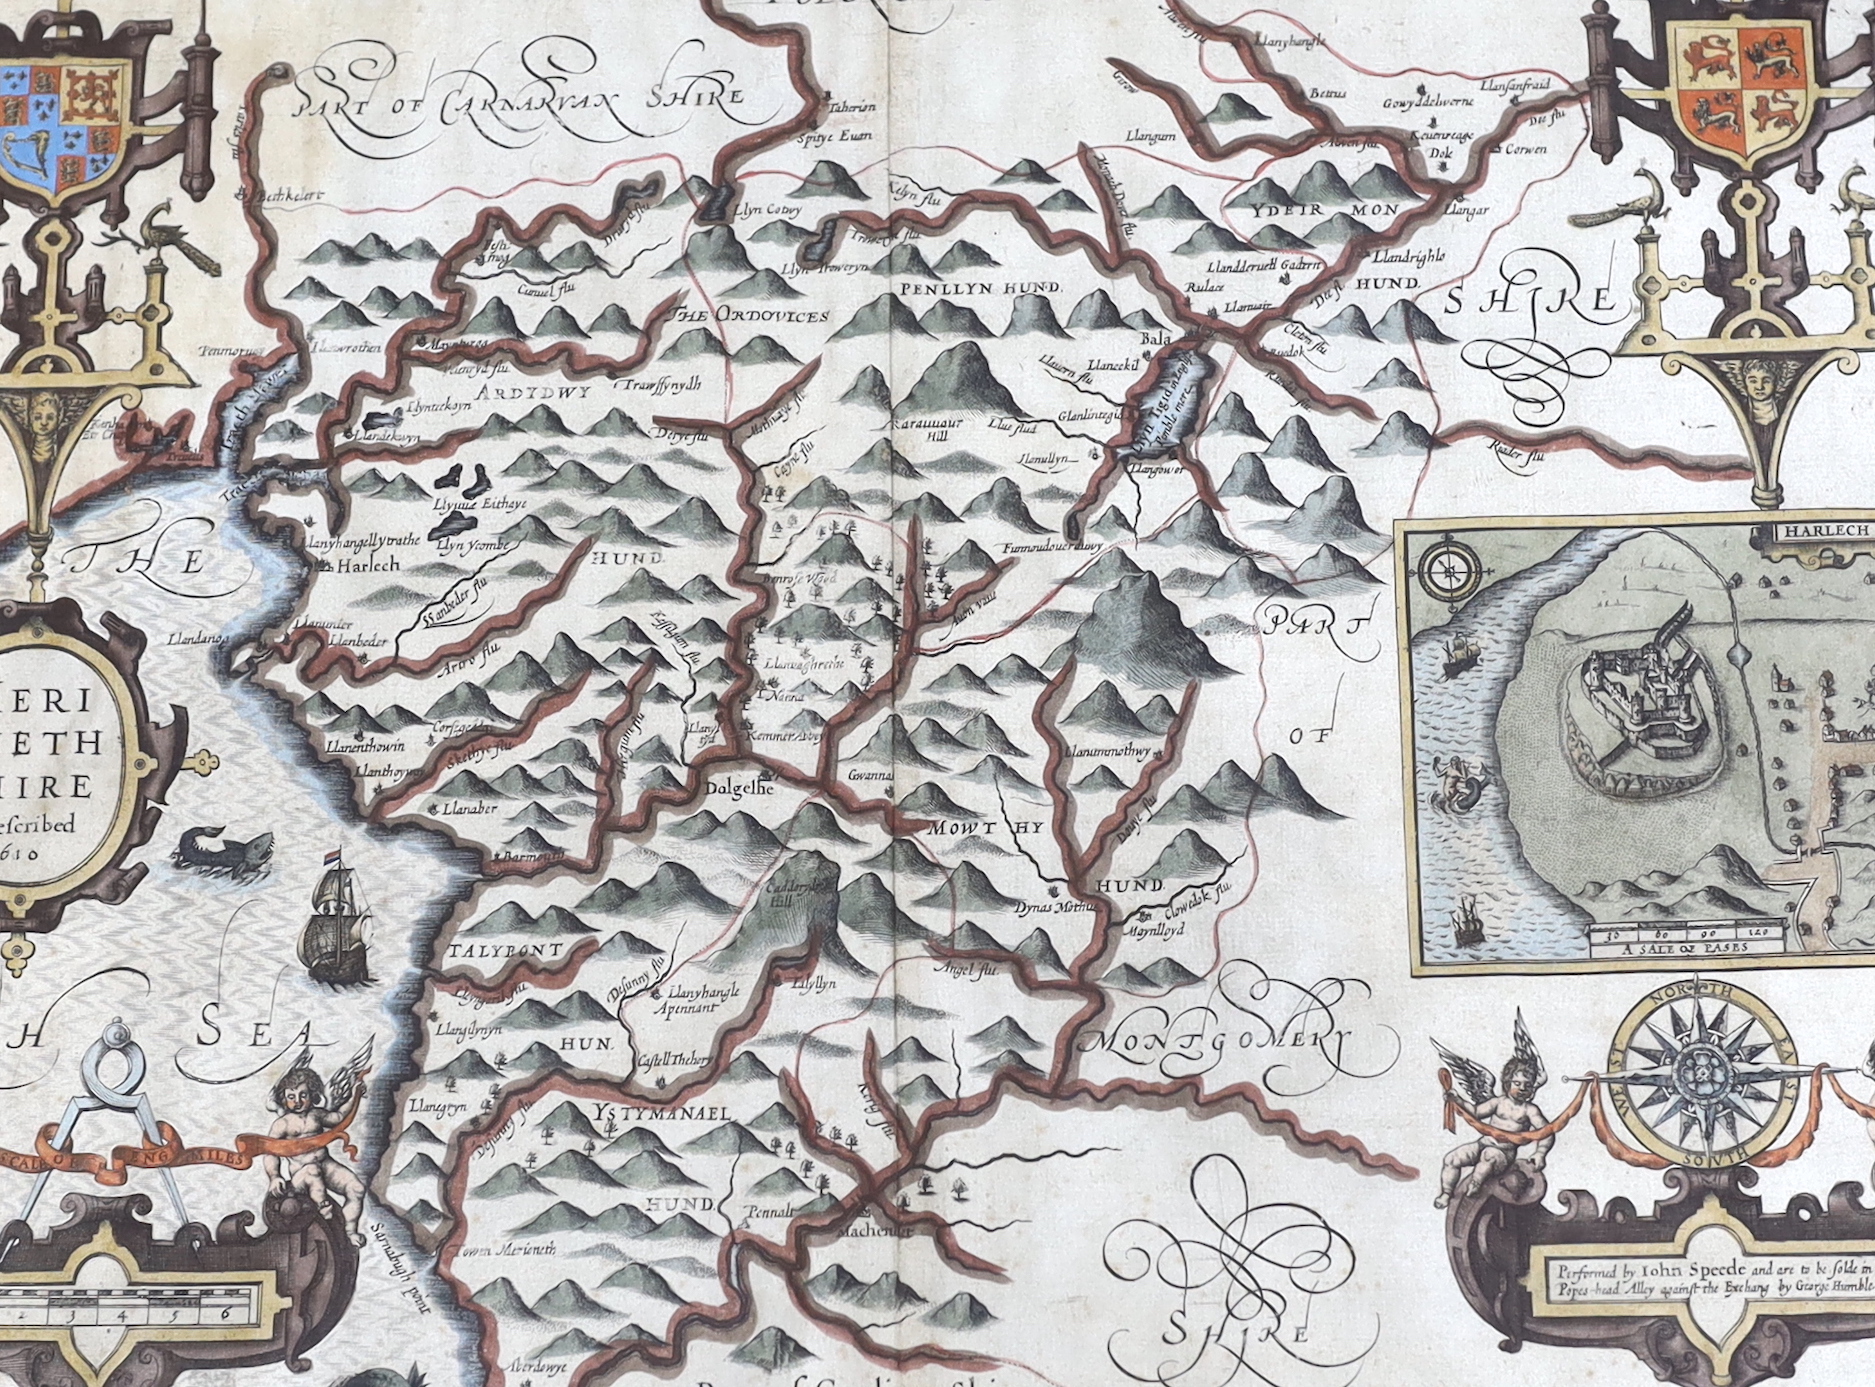 John Speed (1552-1629), hand coloured map of Merionethshire, sold by George Humble, text verso, 39 x 51cm                                                                                                                   